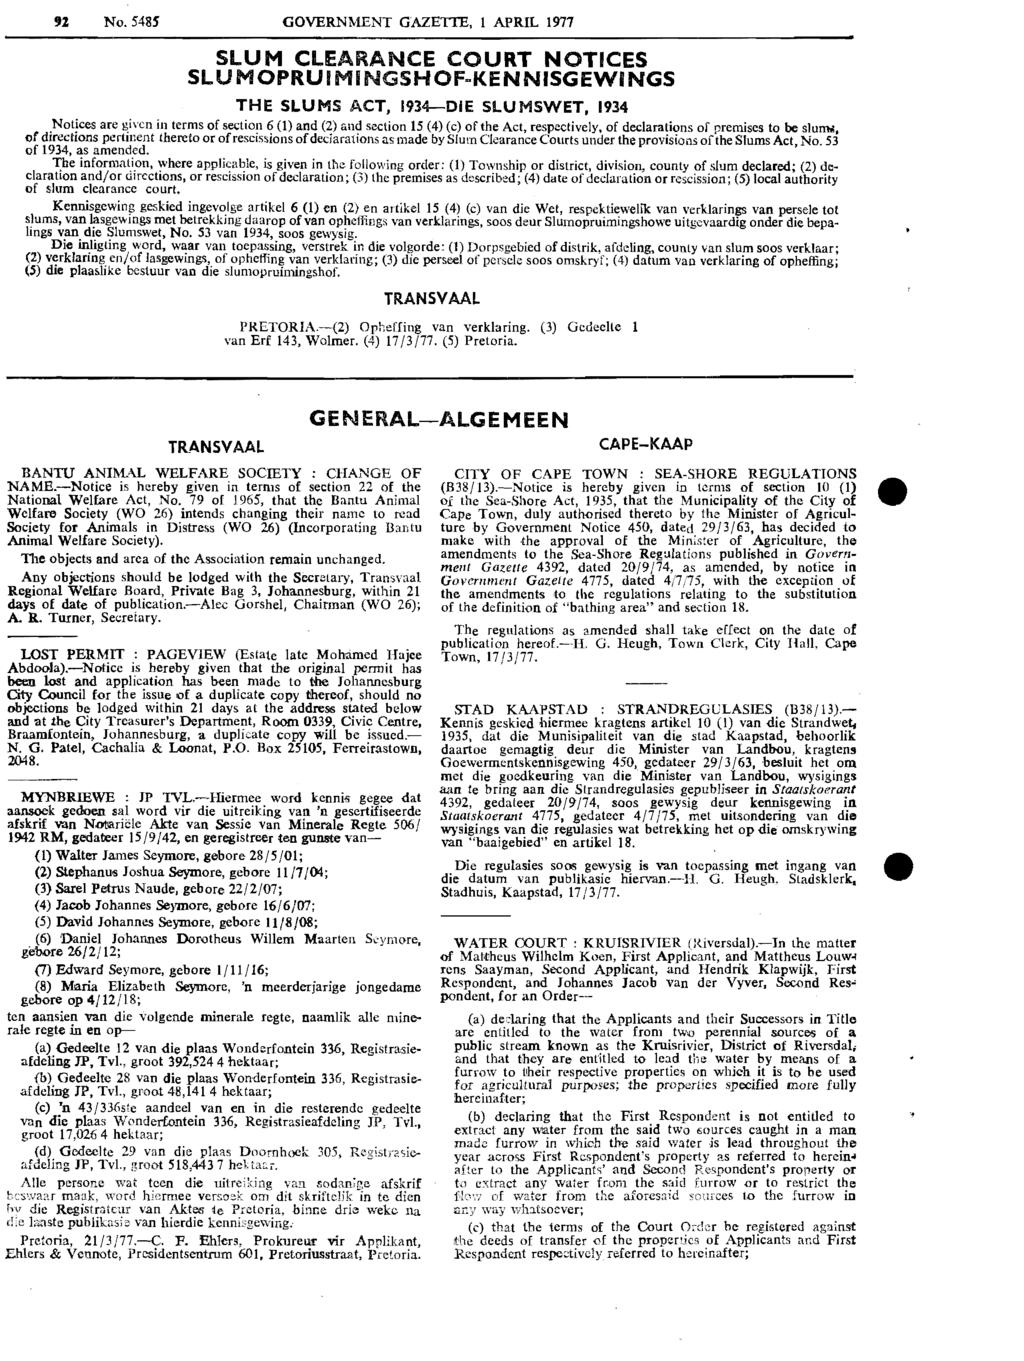 No. 5485 GOVERNMENT GAZETIE, 1 APRIL 1971 SLUM CLEARANCE COURT NOTICES SLUMOPRUIMINGSHOF-KENNISGEWINGS THE SLUMS ACT, 1934-DIE SlUMSWET, 1934 Notices are given in terms of section 6 (1) and (2) and